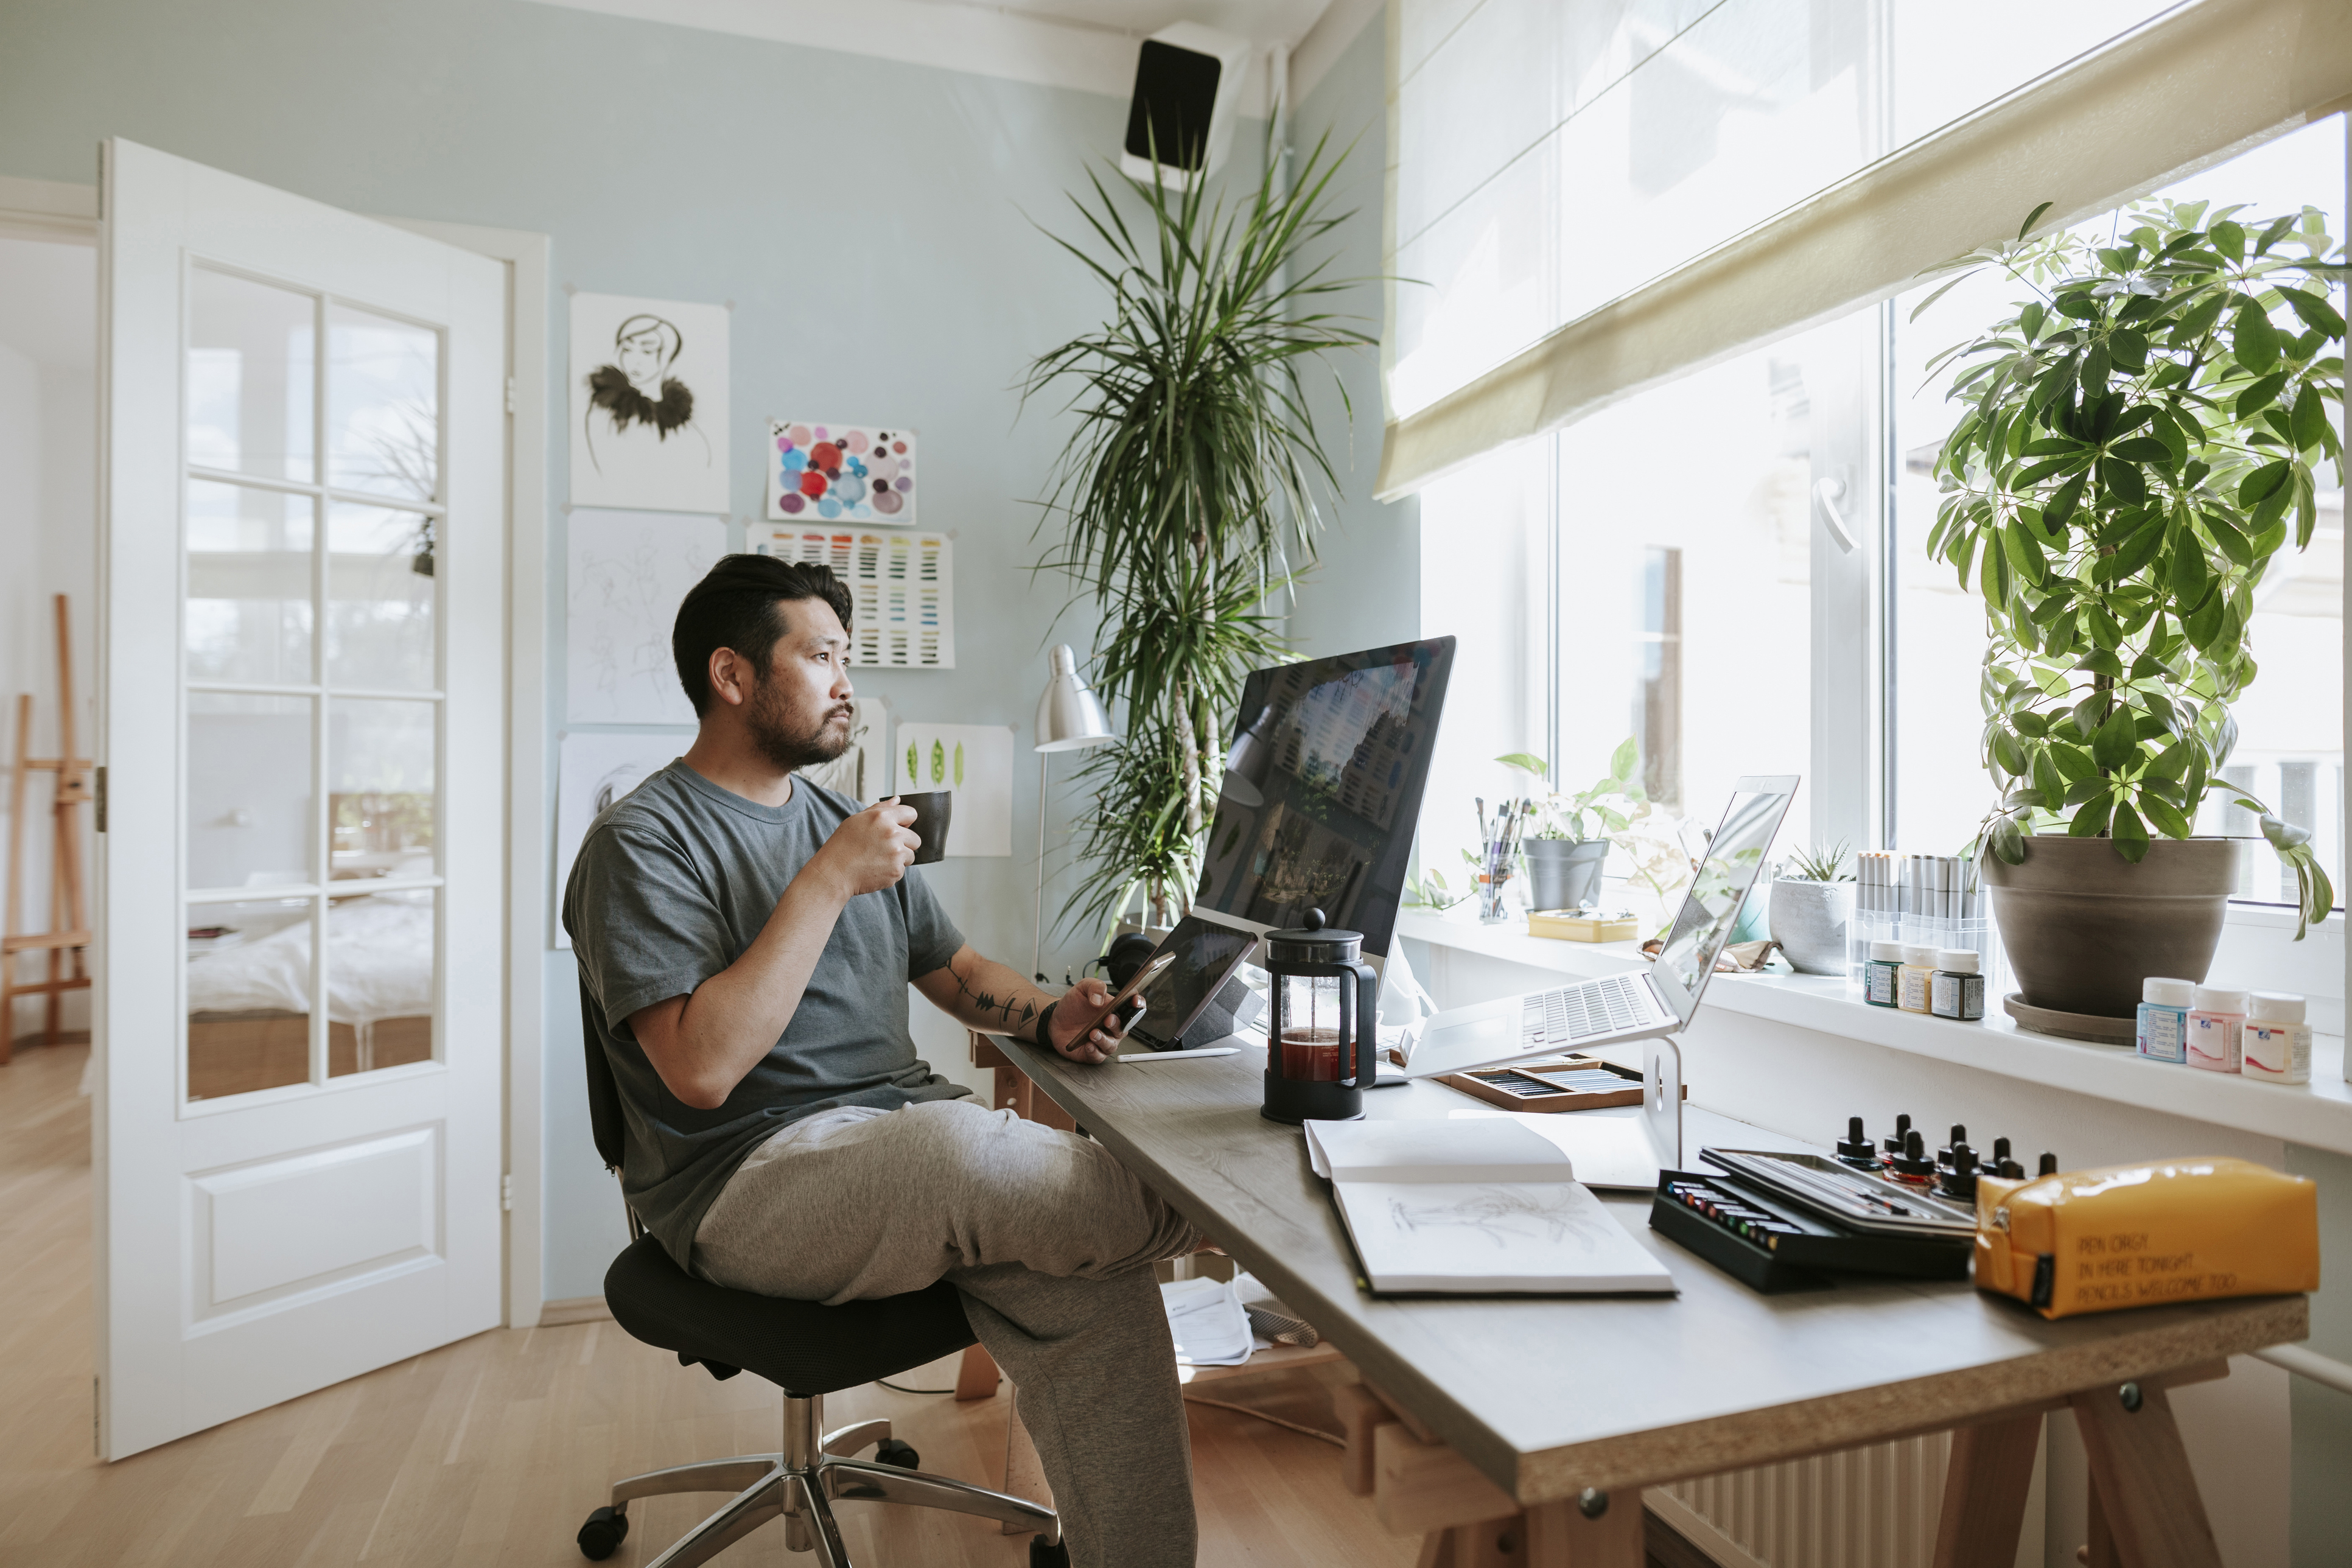 Can working from home full time stunt your career growth? Ask HR